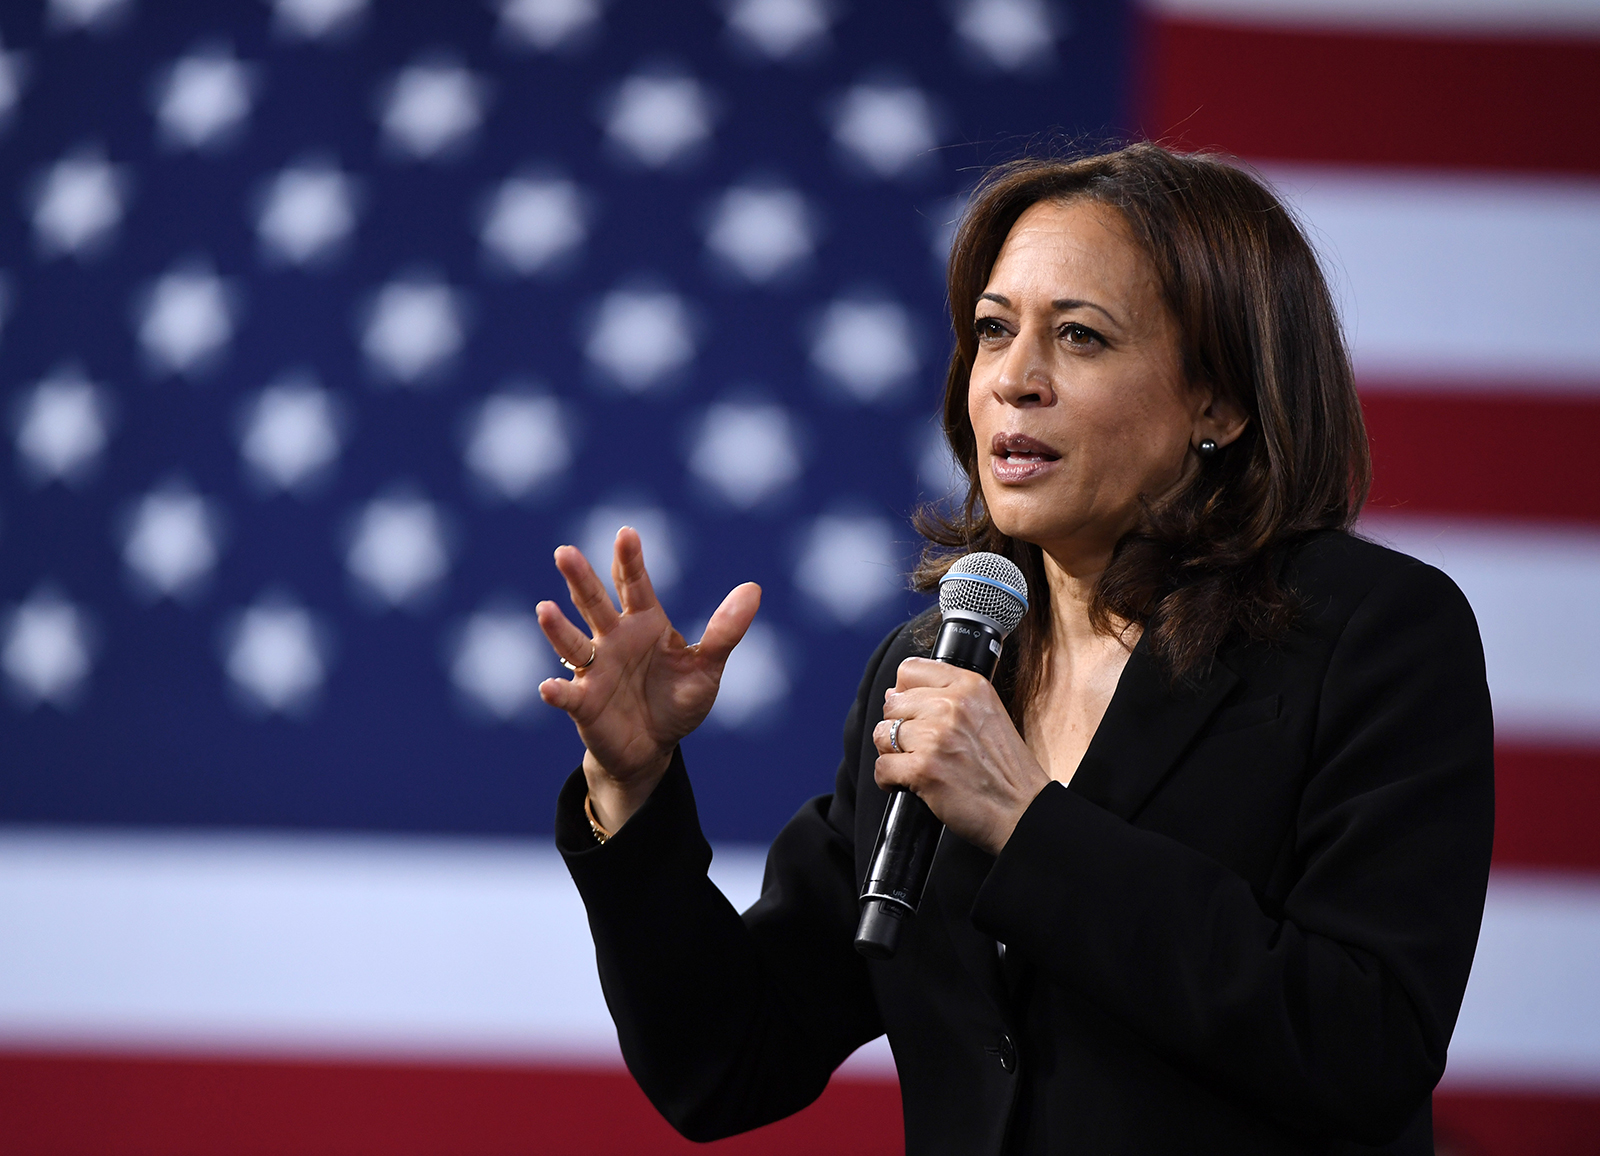 Sen. Kamala Harris speaks at the National Forum on Wages and Working People: Creating an Economy That Works for All at Enclave on April 27, 2019 in Las Vegas, Nevada.